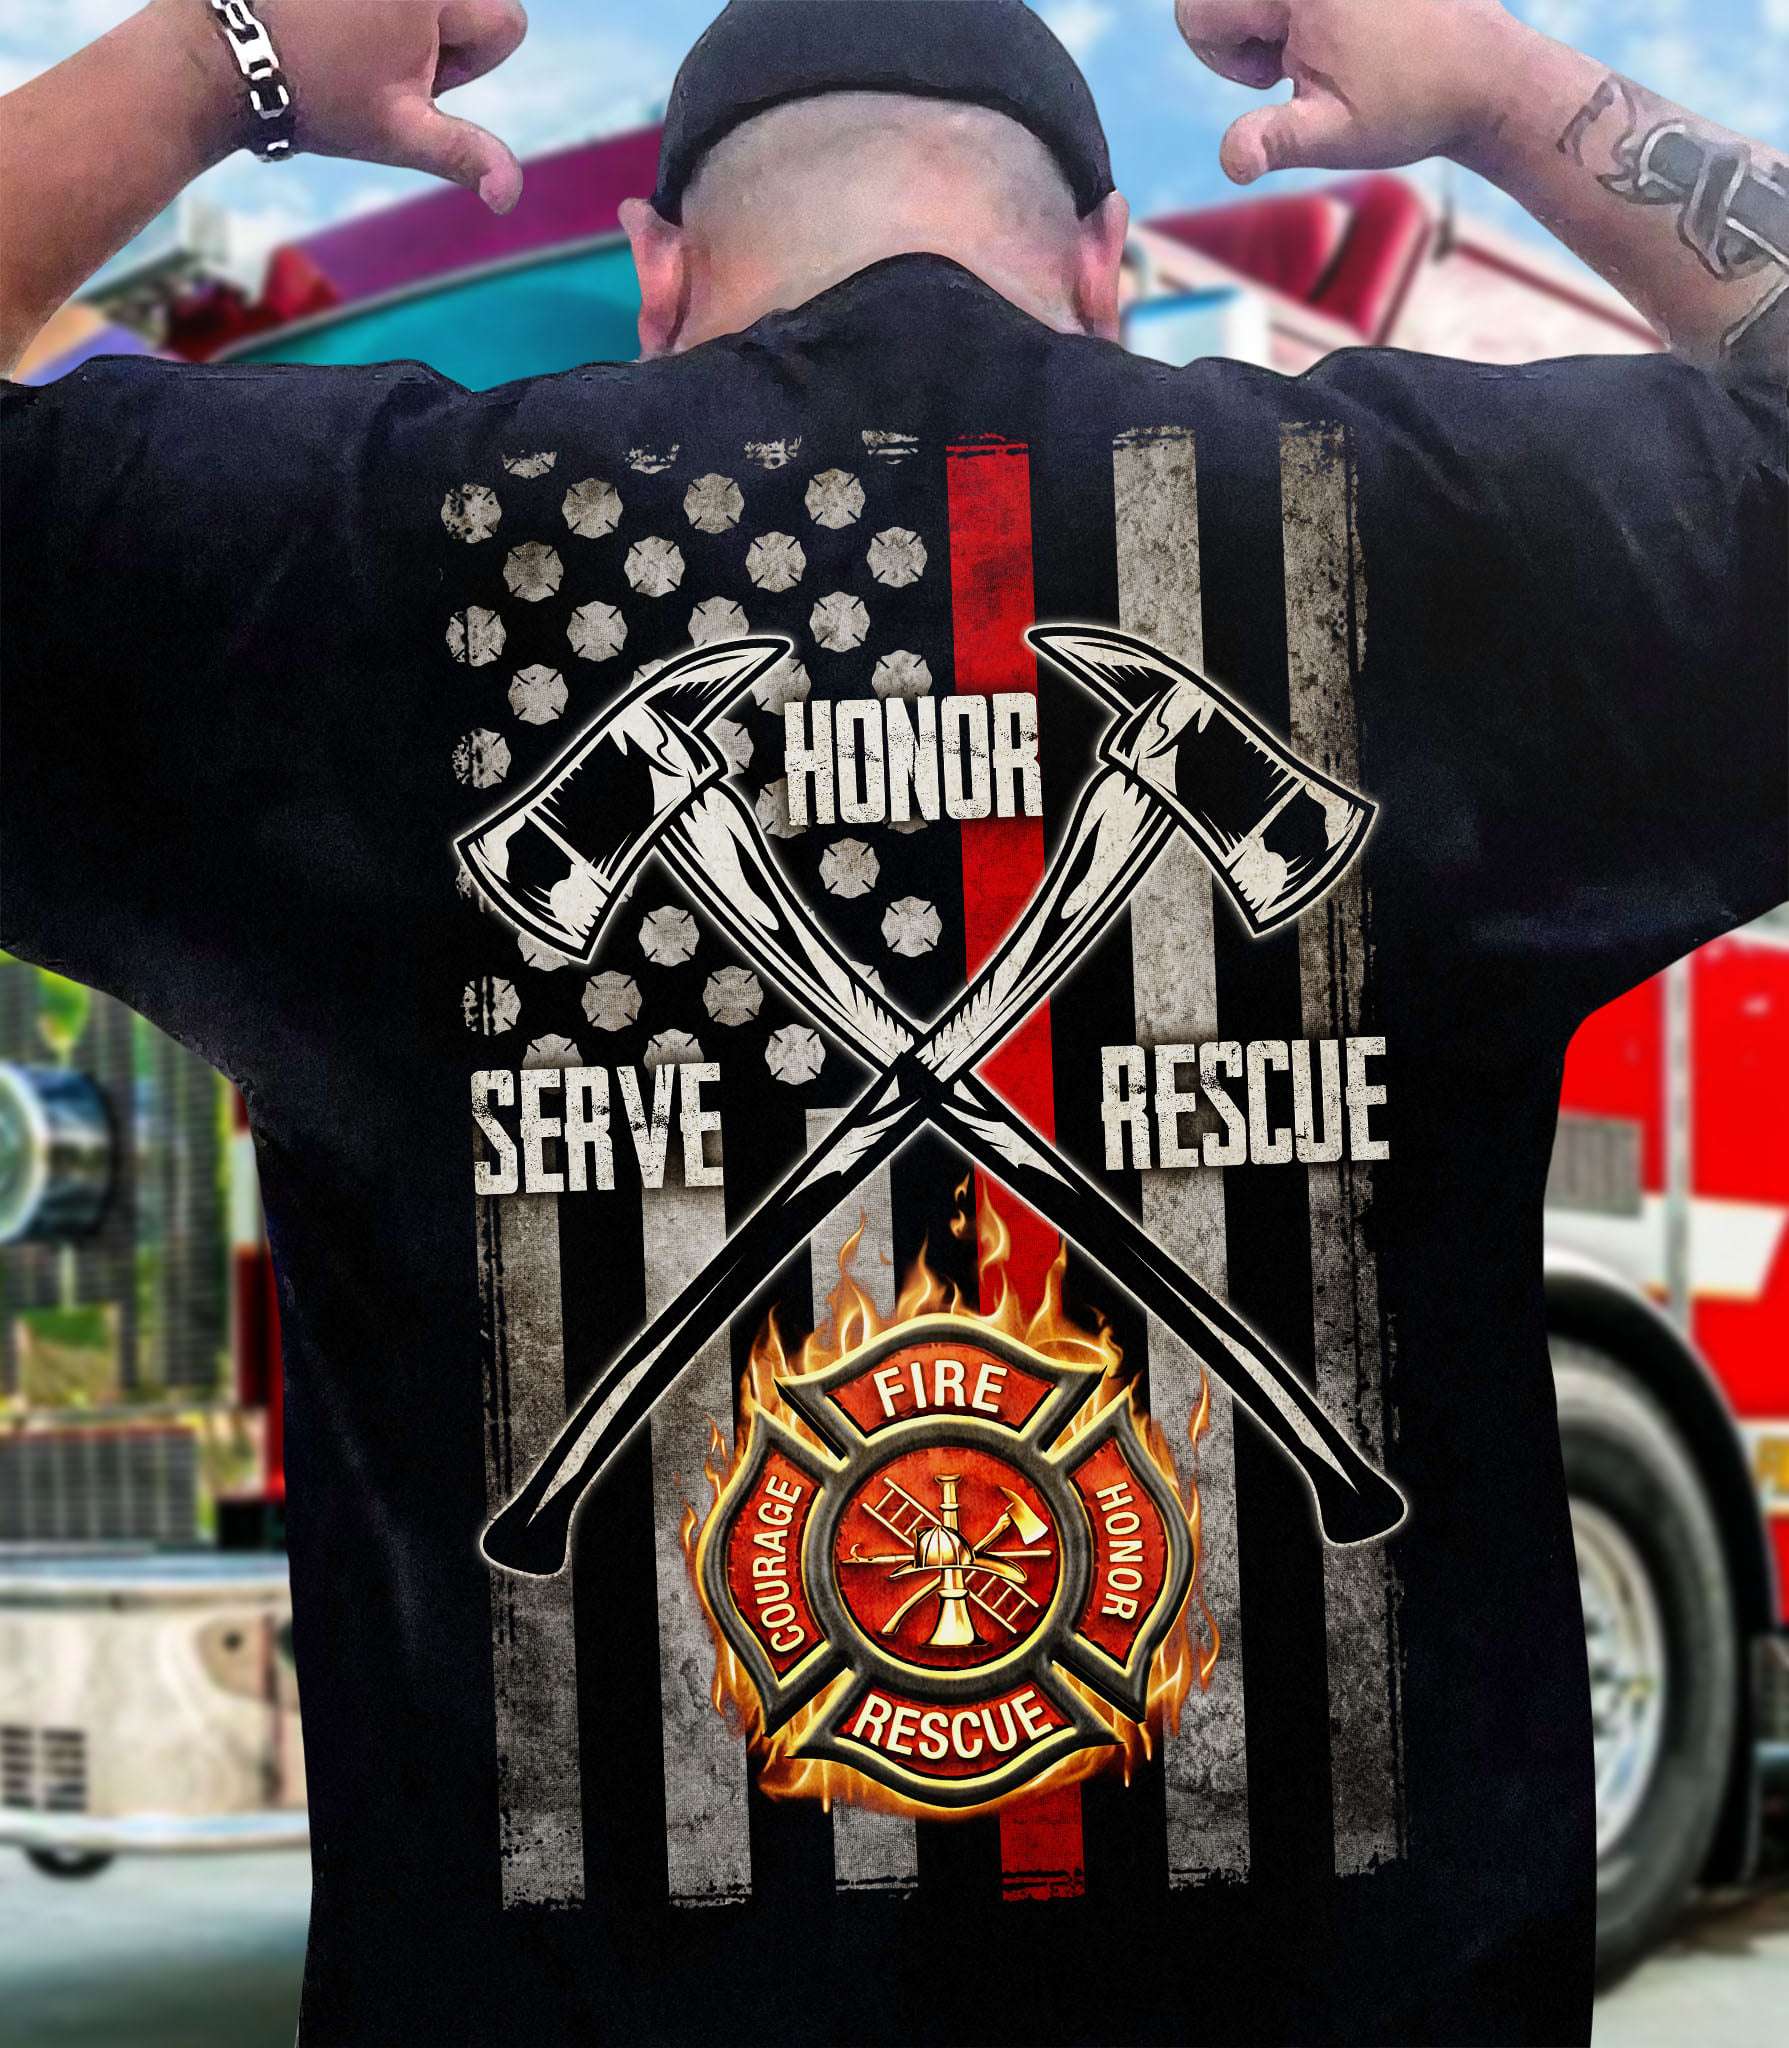 Firefighter the job - American firefighter, Honor serve rescue